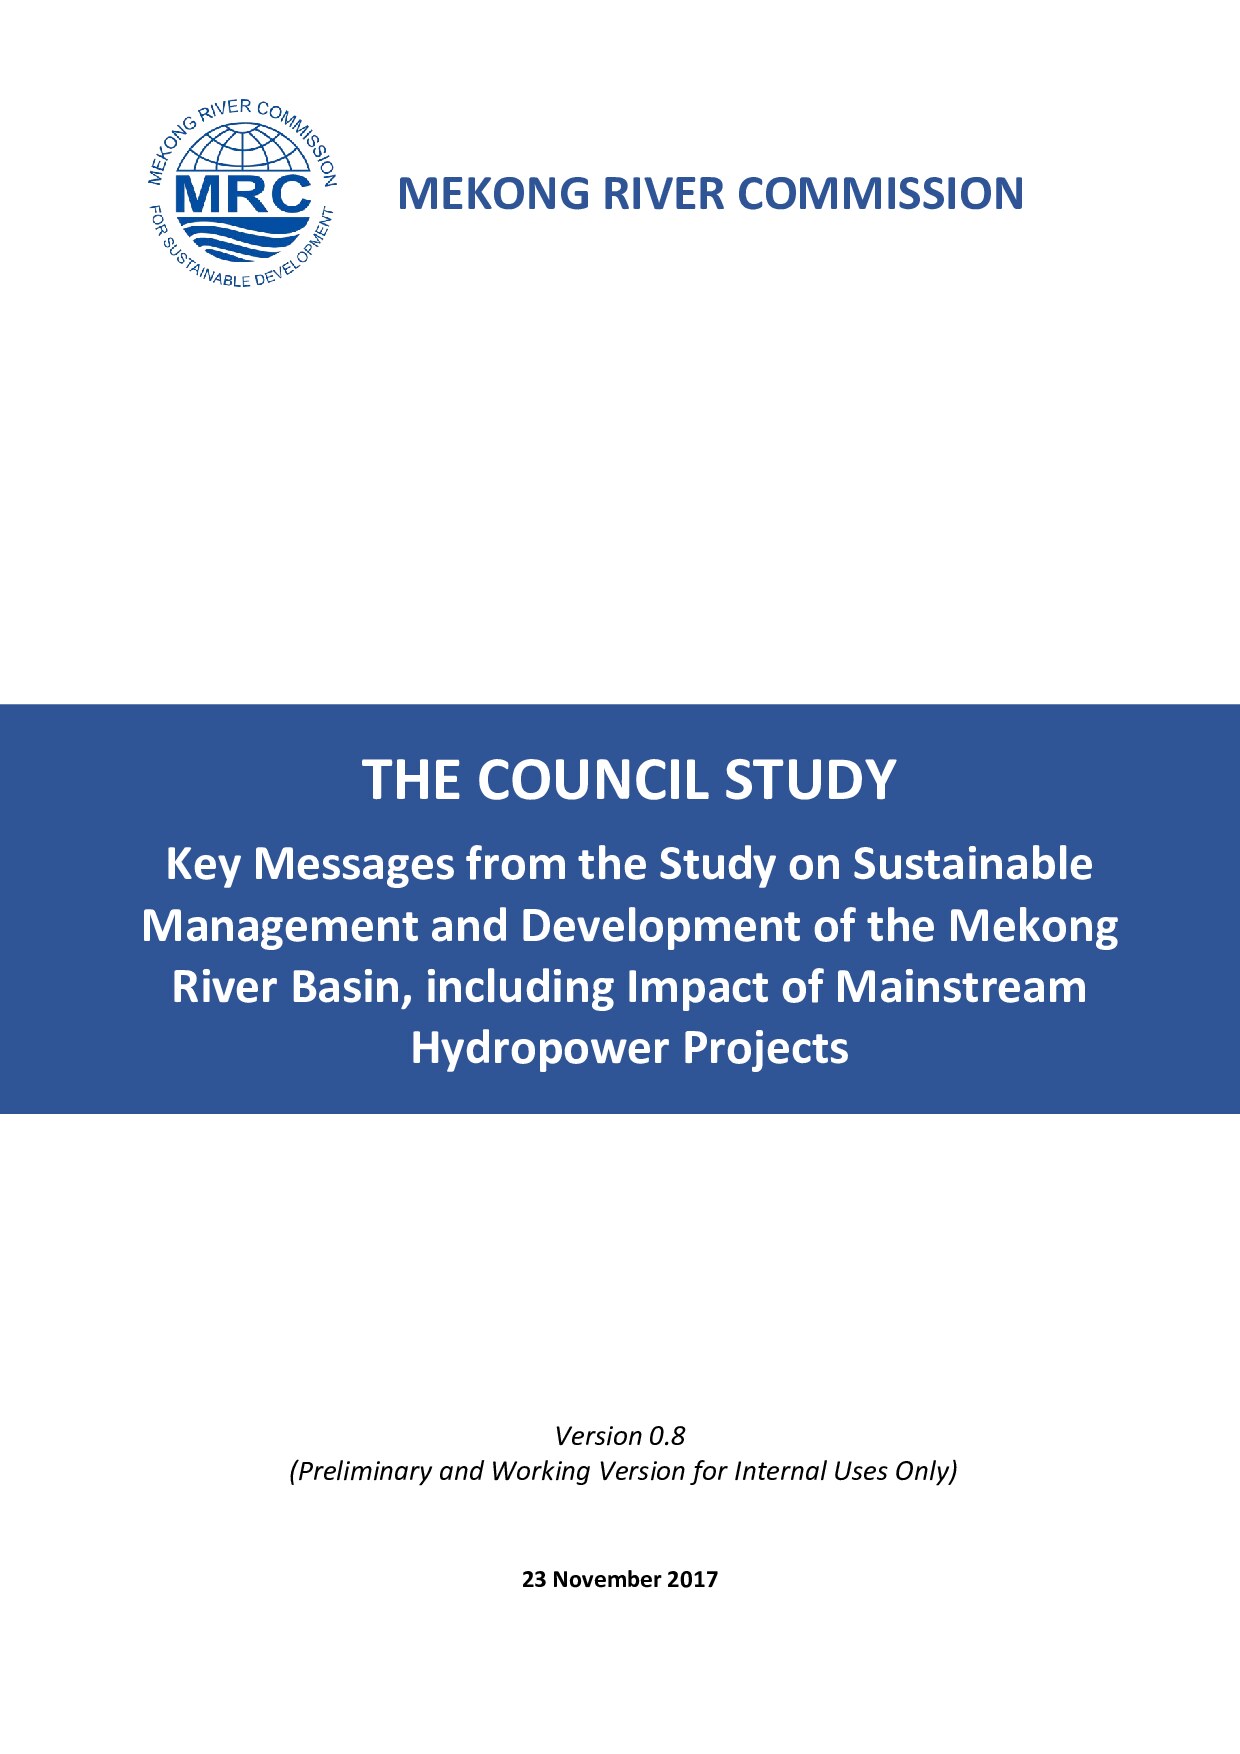 THE COUNCIL STUDY Key Messages from the Study on Sustainable Management and Development of the Mekong River Basin, including Impact of Mainstream Hydropower Projects